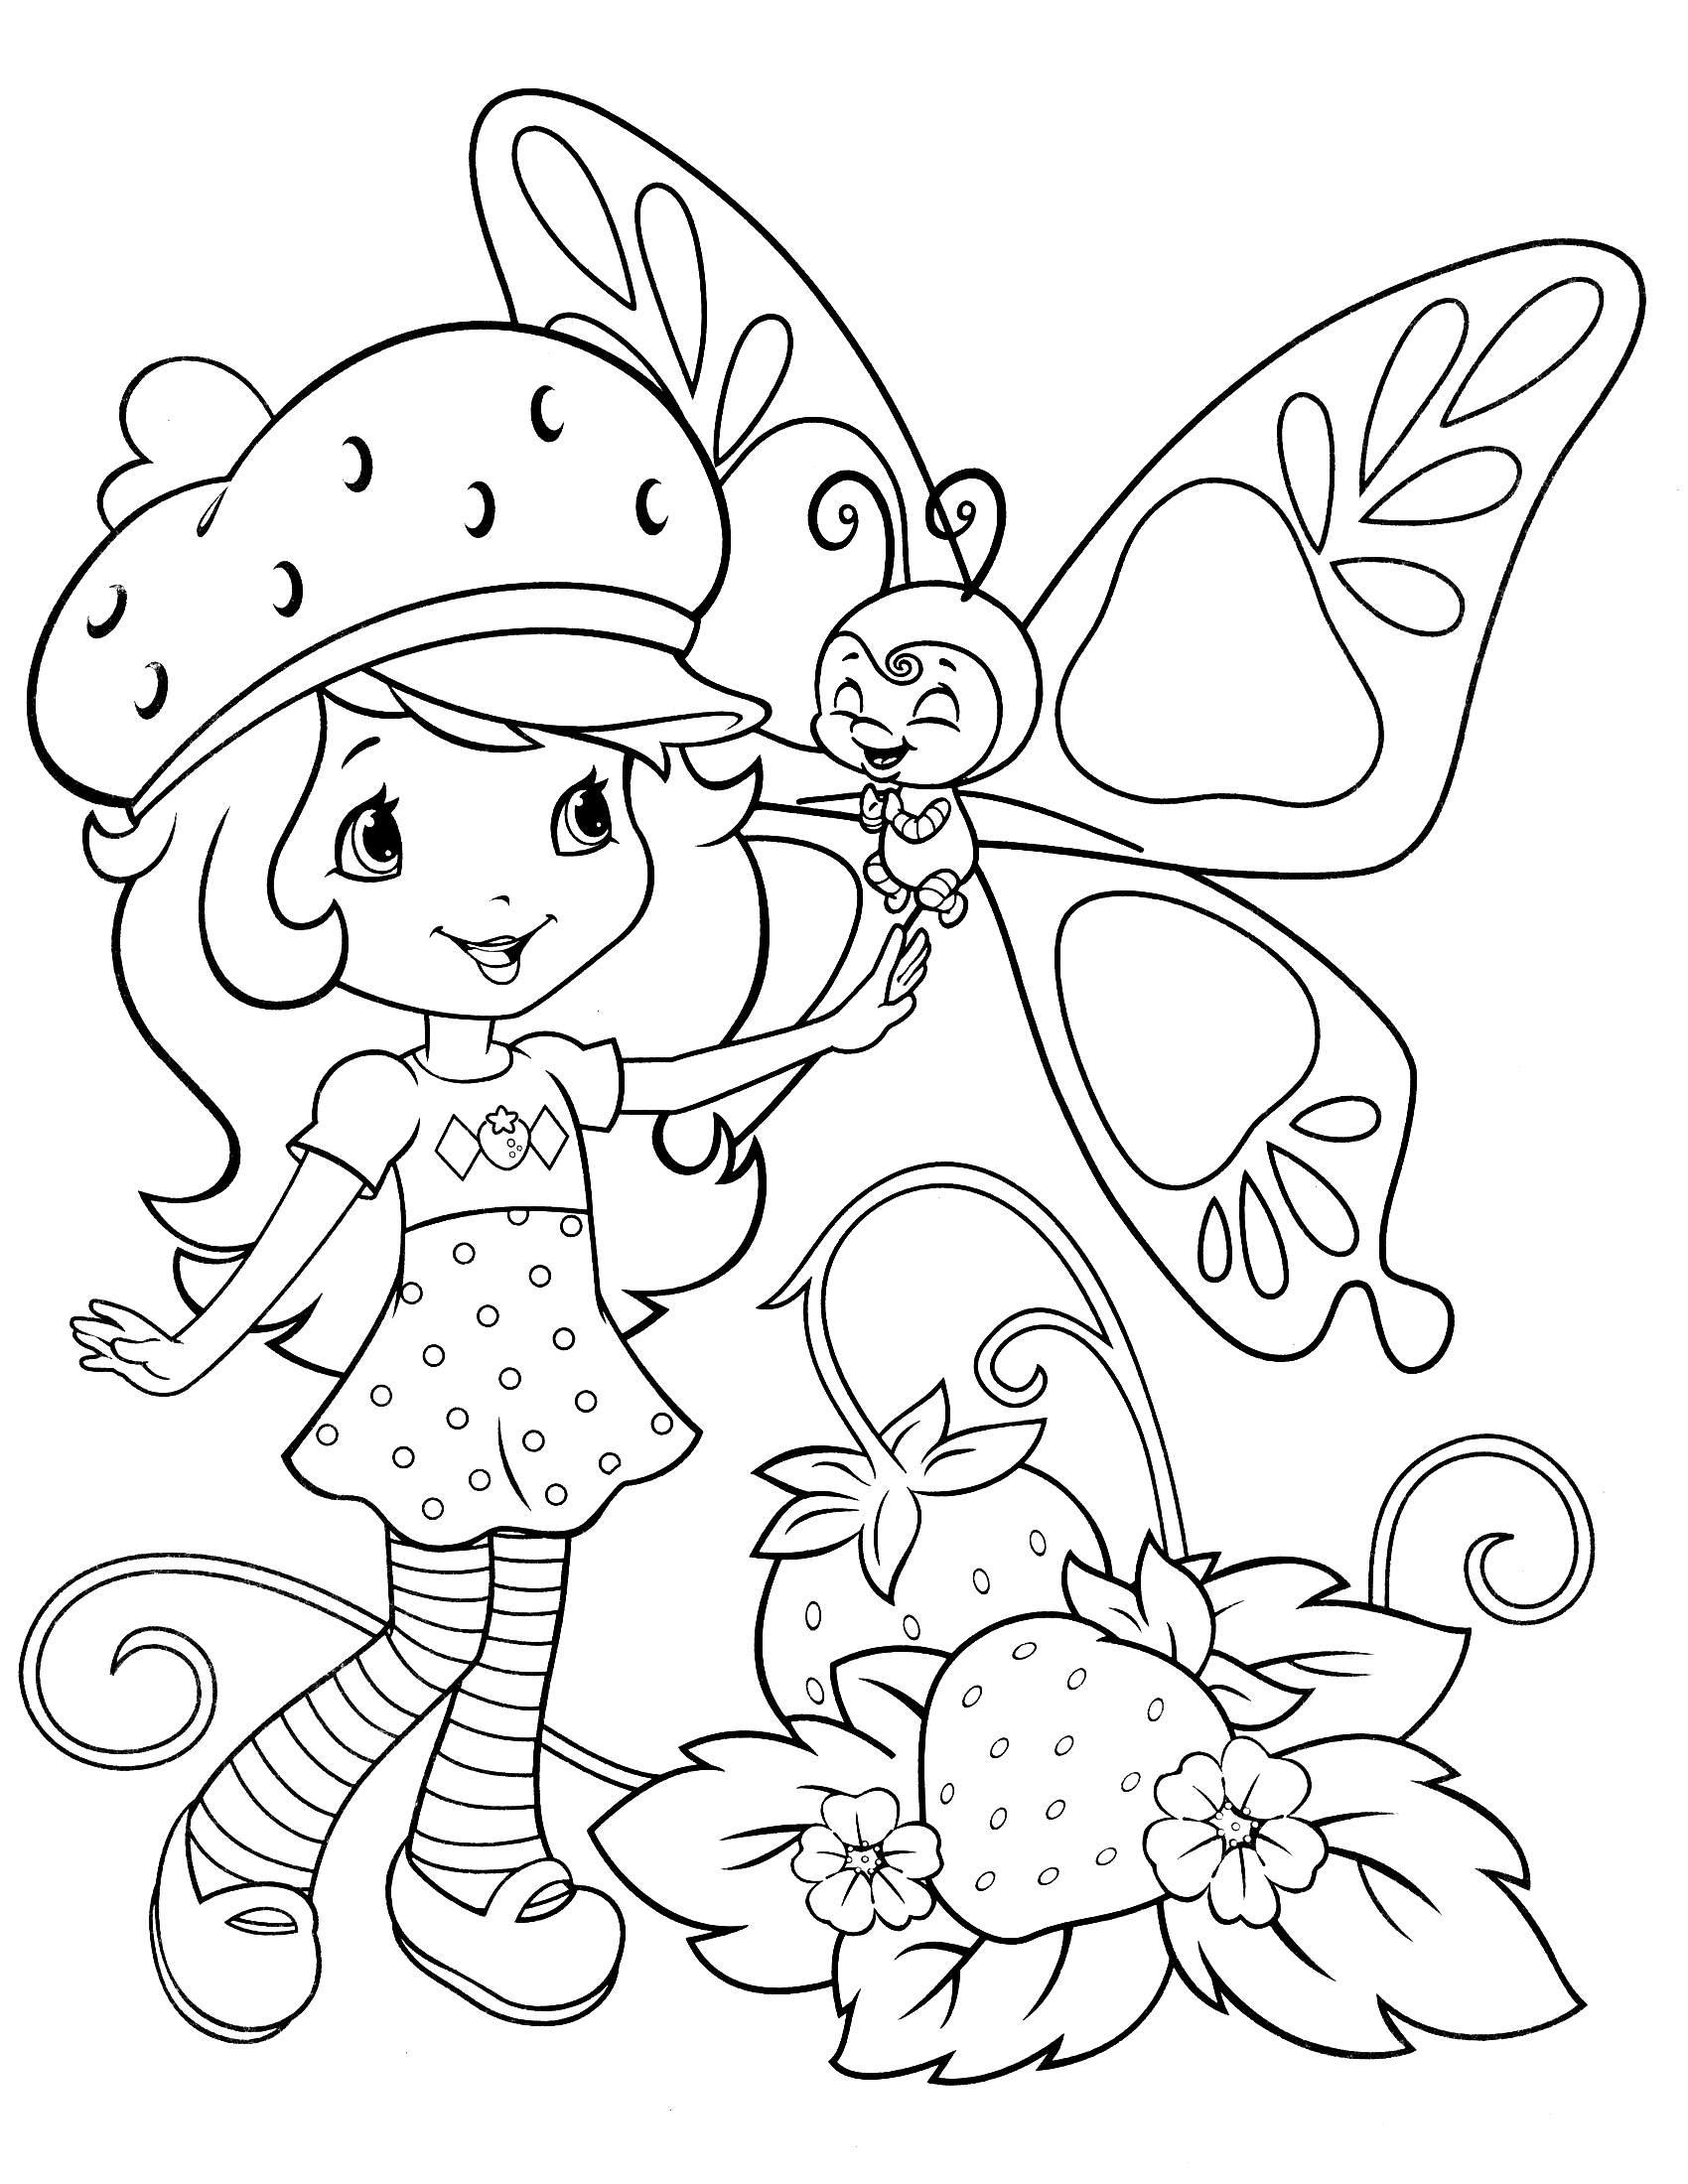 Printable Strawberry Shortcake Coloring Pages ColoringMe